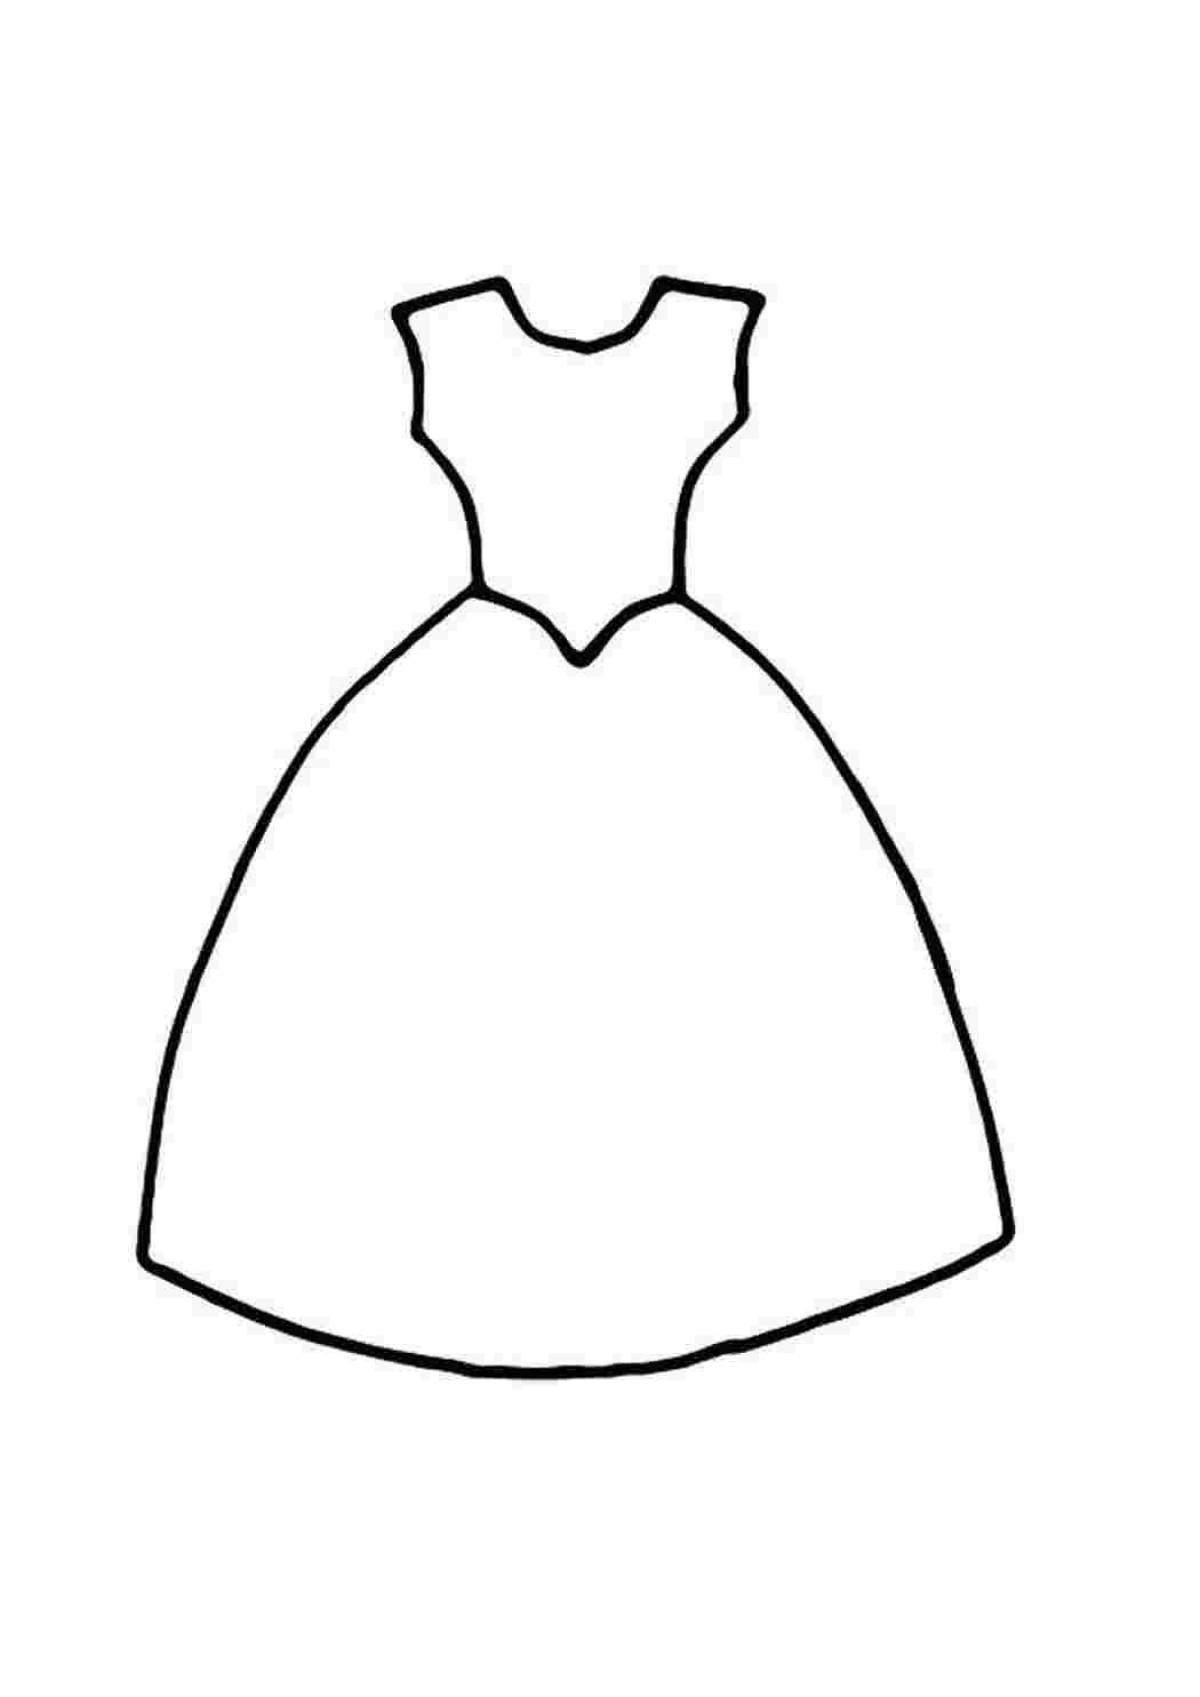 Refreshing dress coloring page